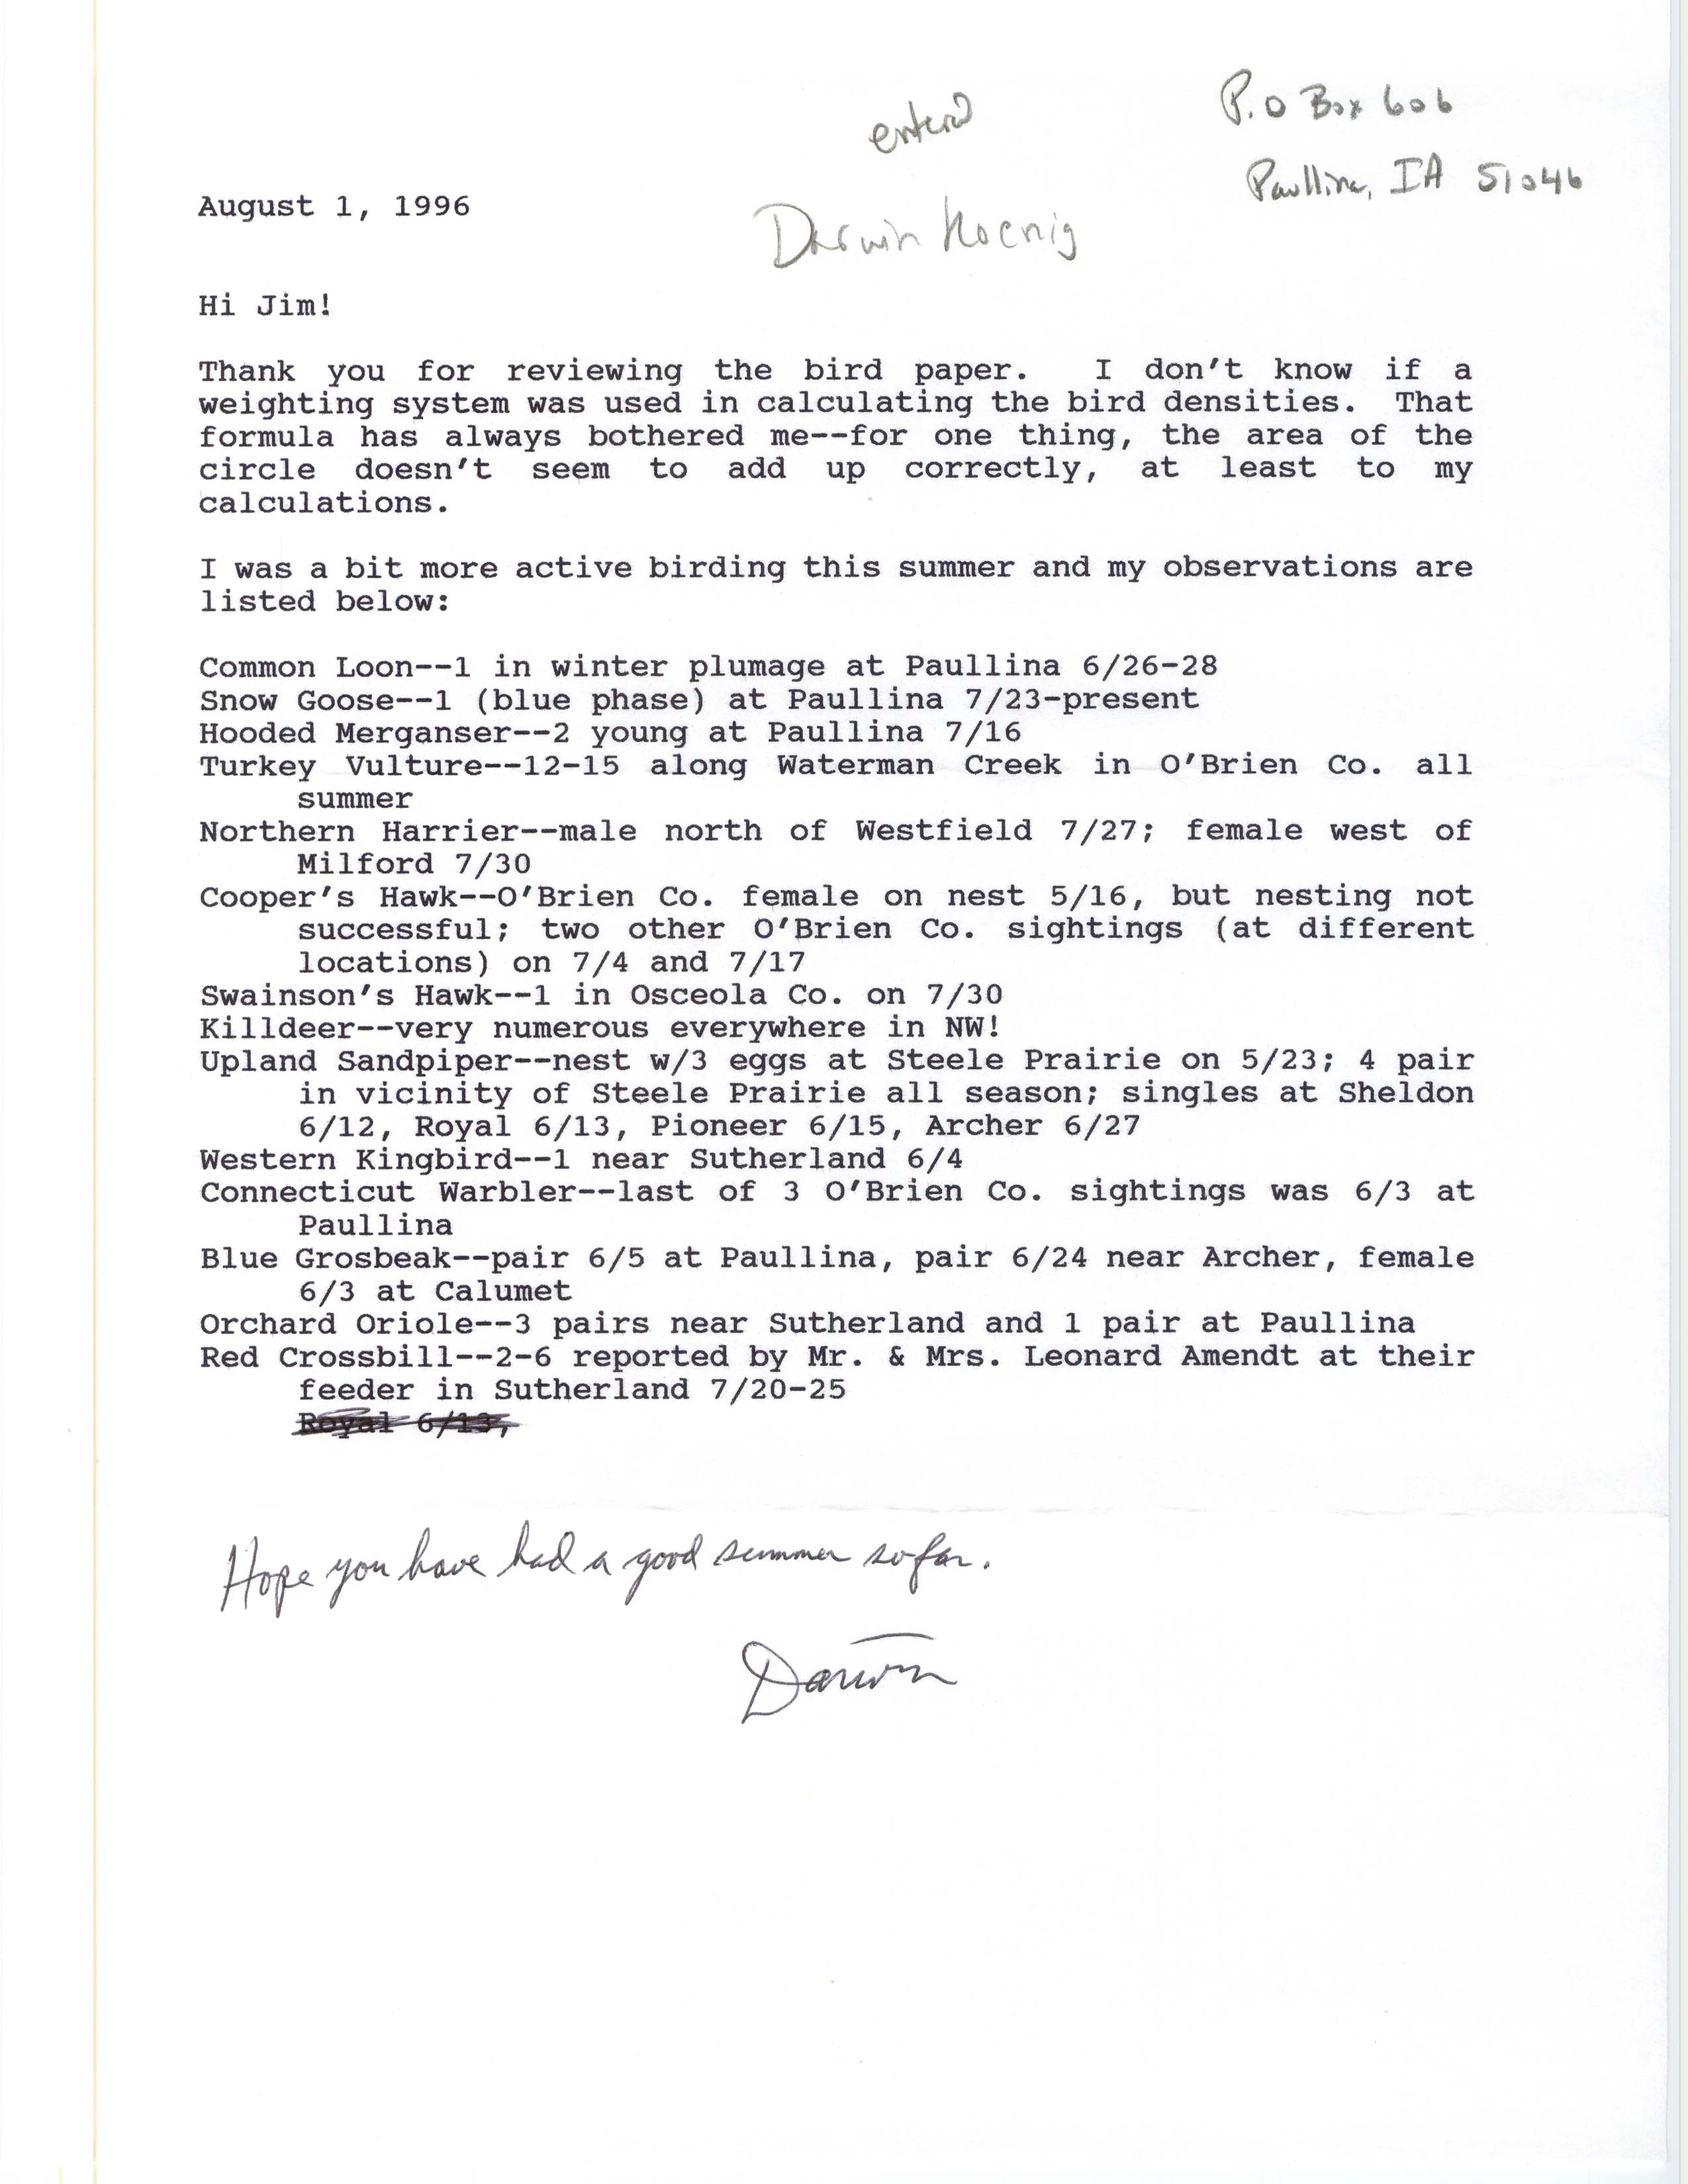 Field notes and Darwin Koenig letter to James J. Dinsmore, August 1, 1996